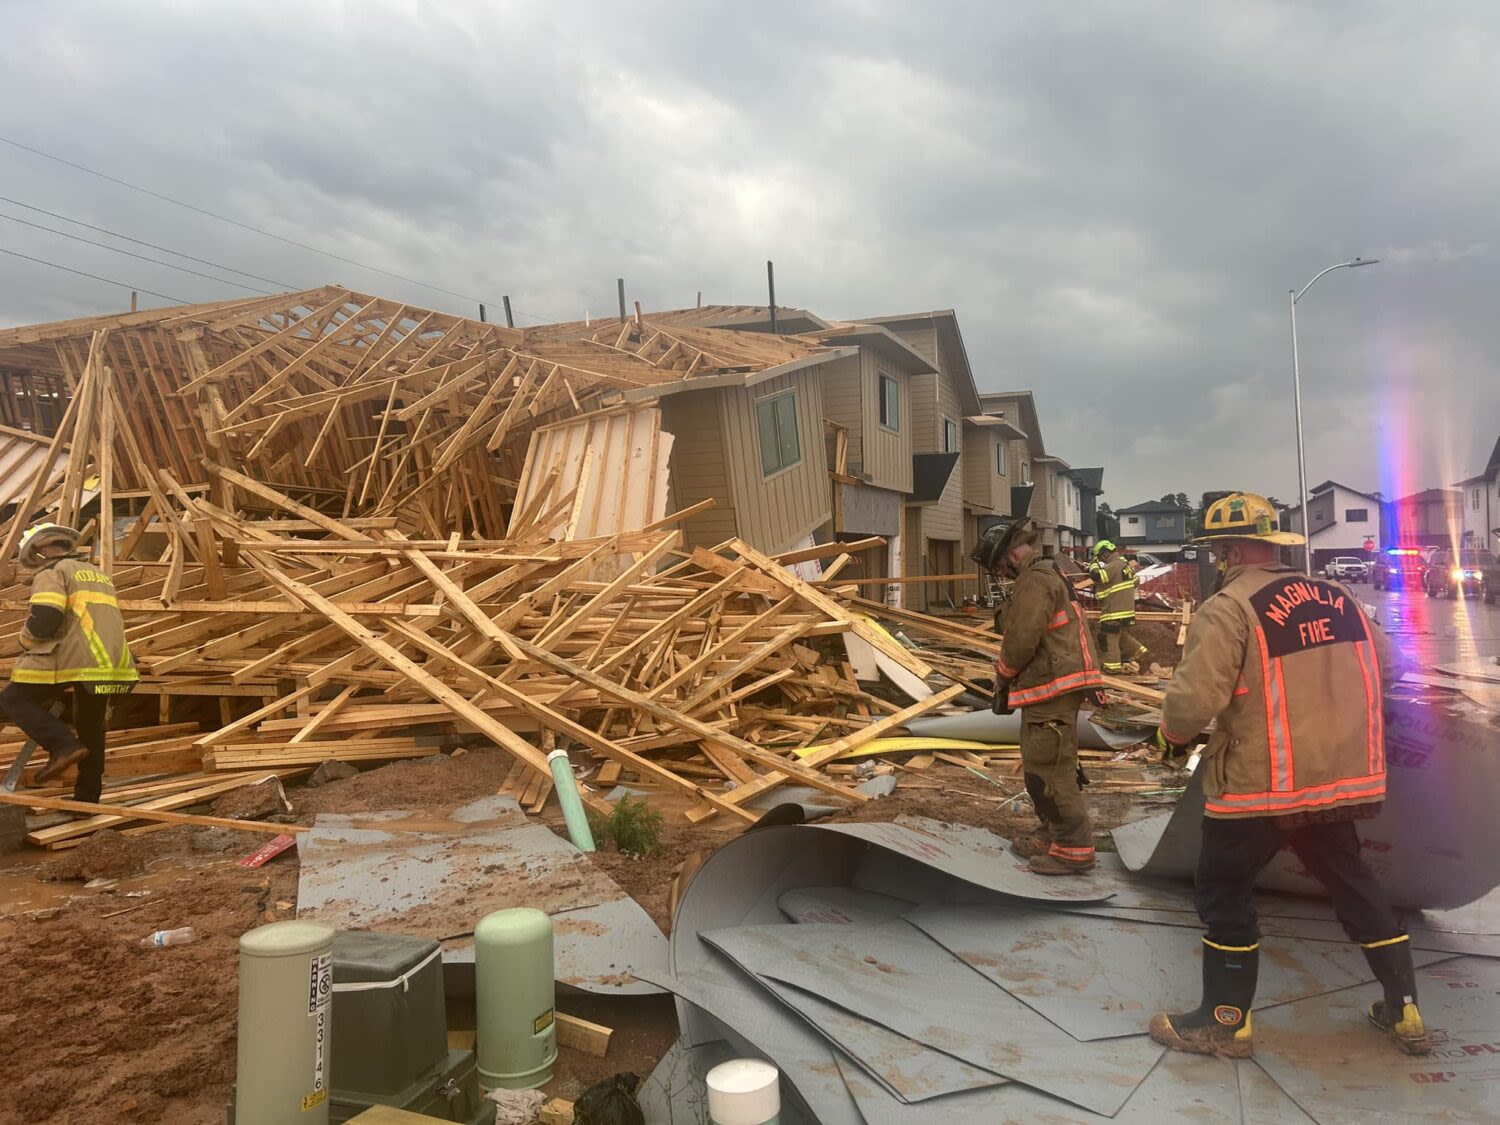 Houston storms: One dead after houses under construction collapse Tuesday | Houston Public Media